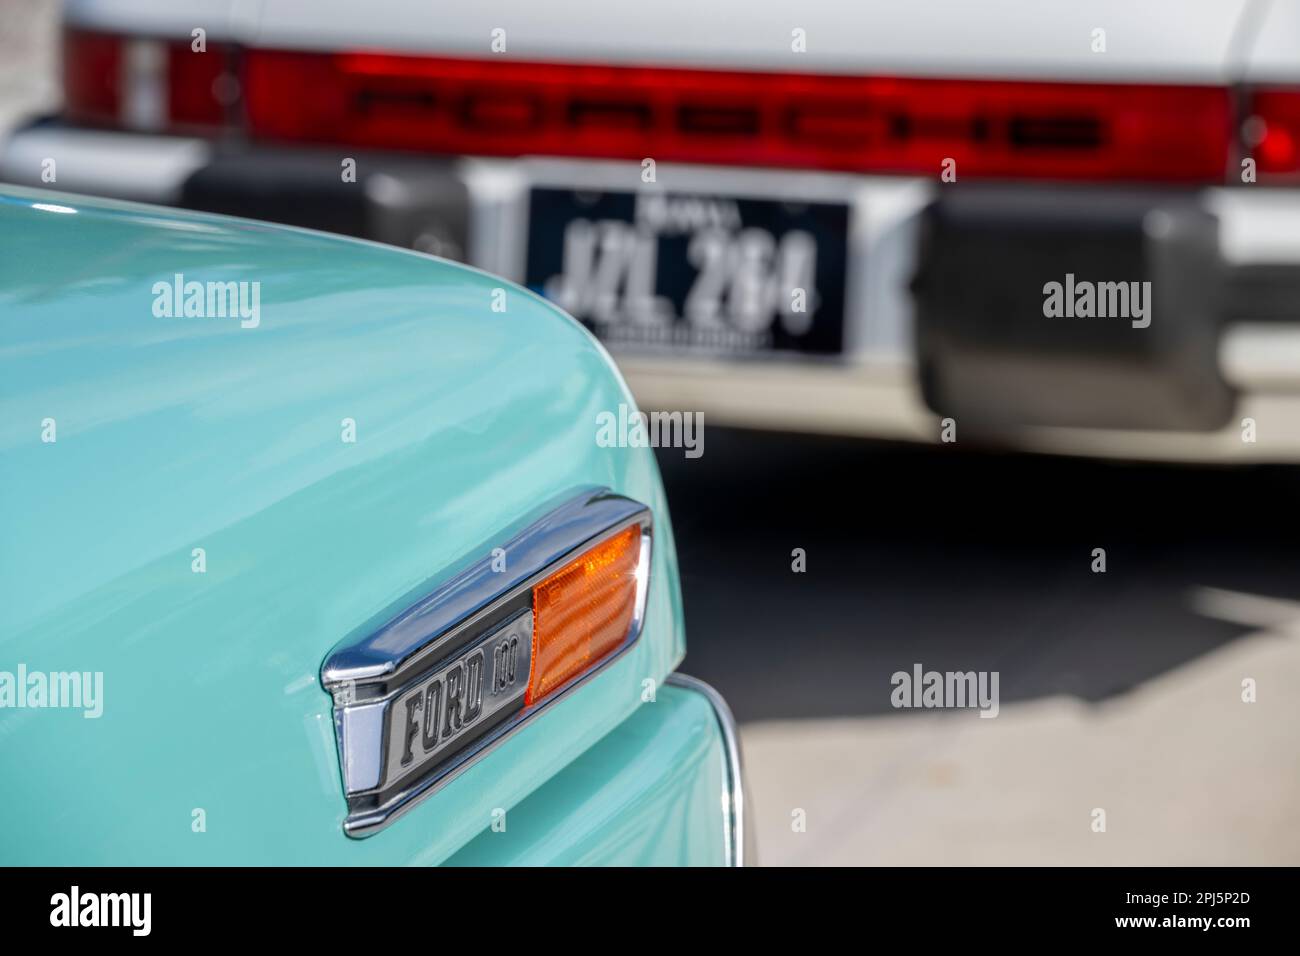 Classic Ford Pick Up at Dearborn Street, Englewood, Florida. Stock Photo